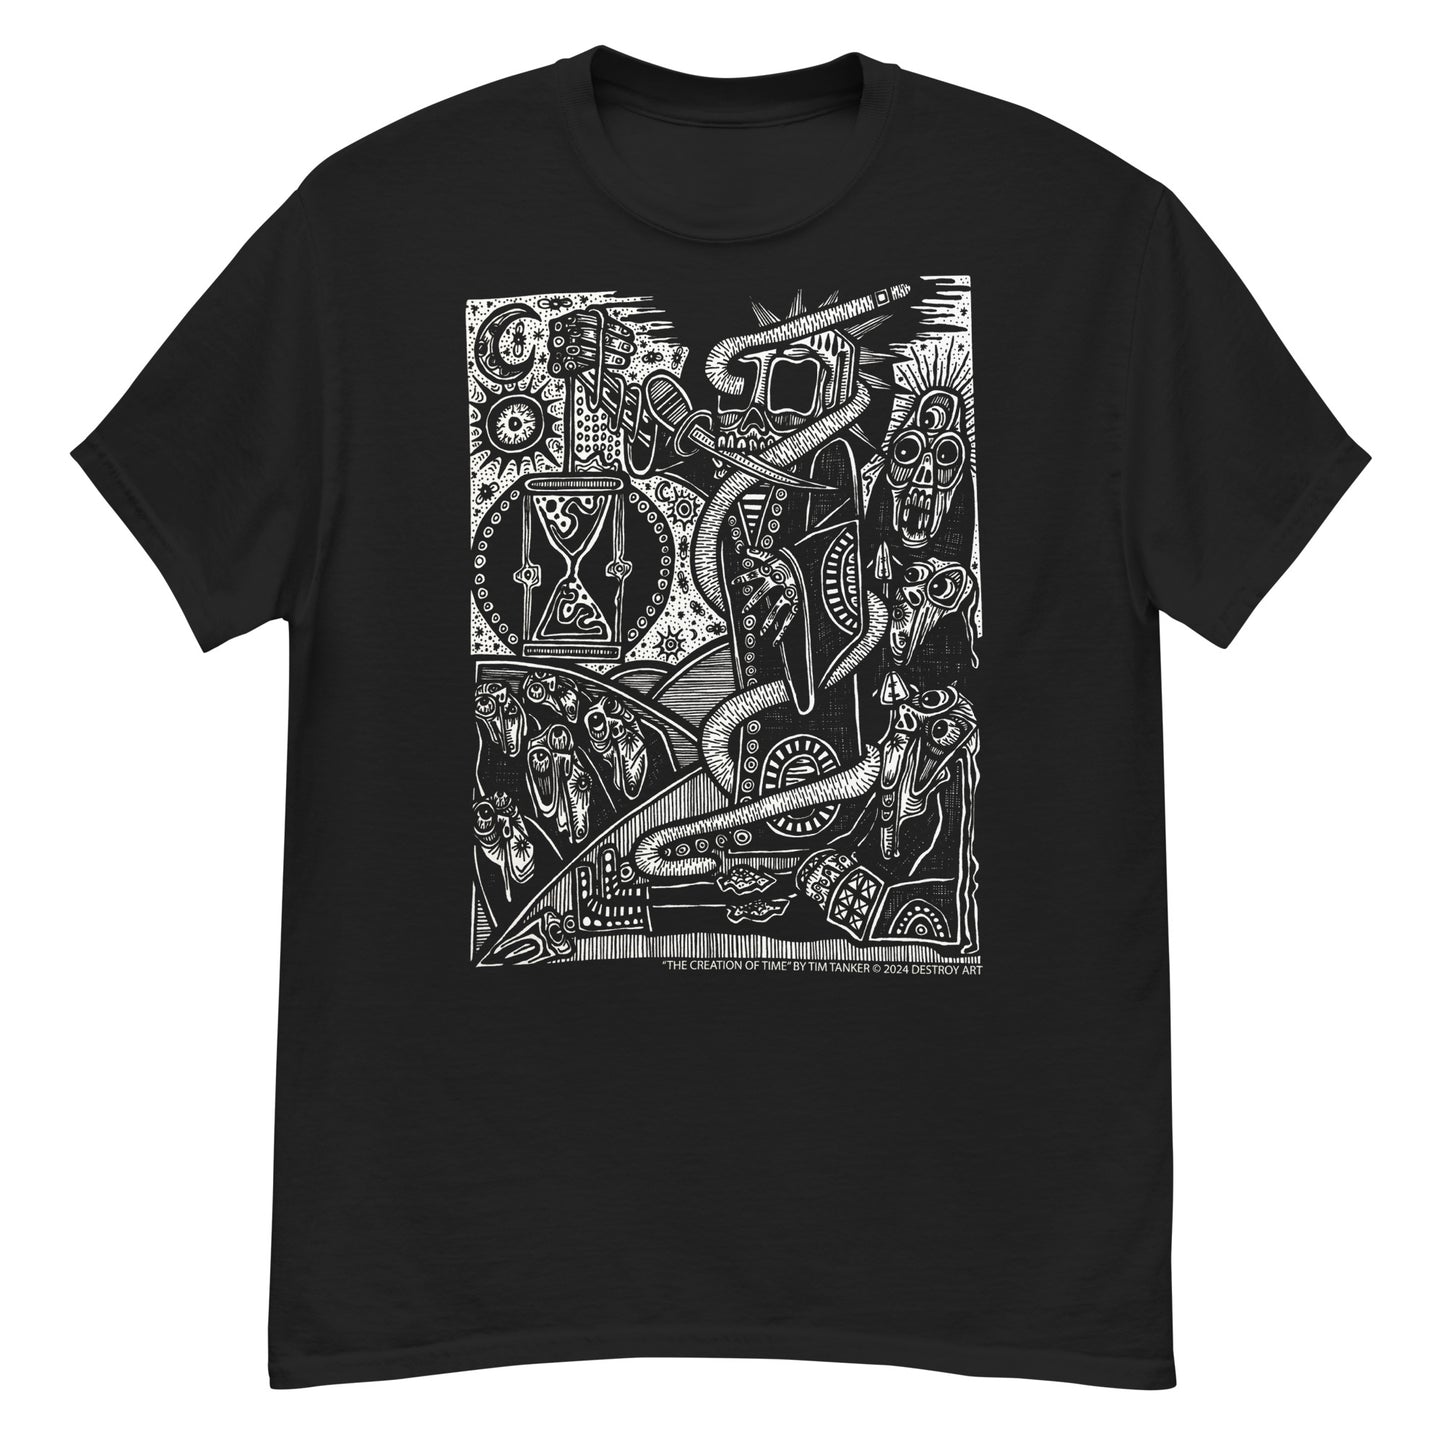 Tim Tanker "The Creation Of Time" Tee